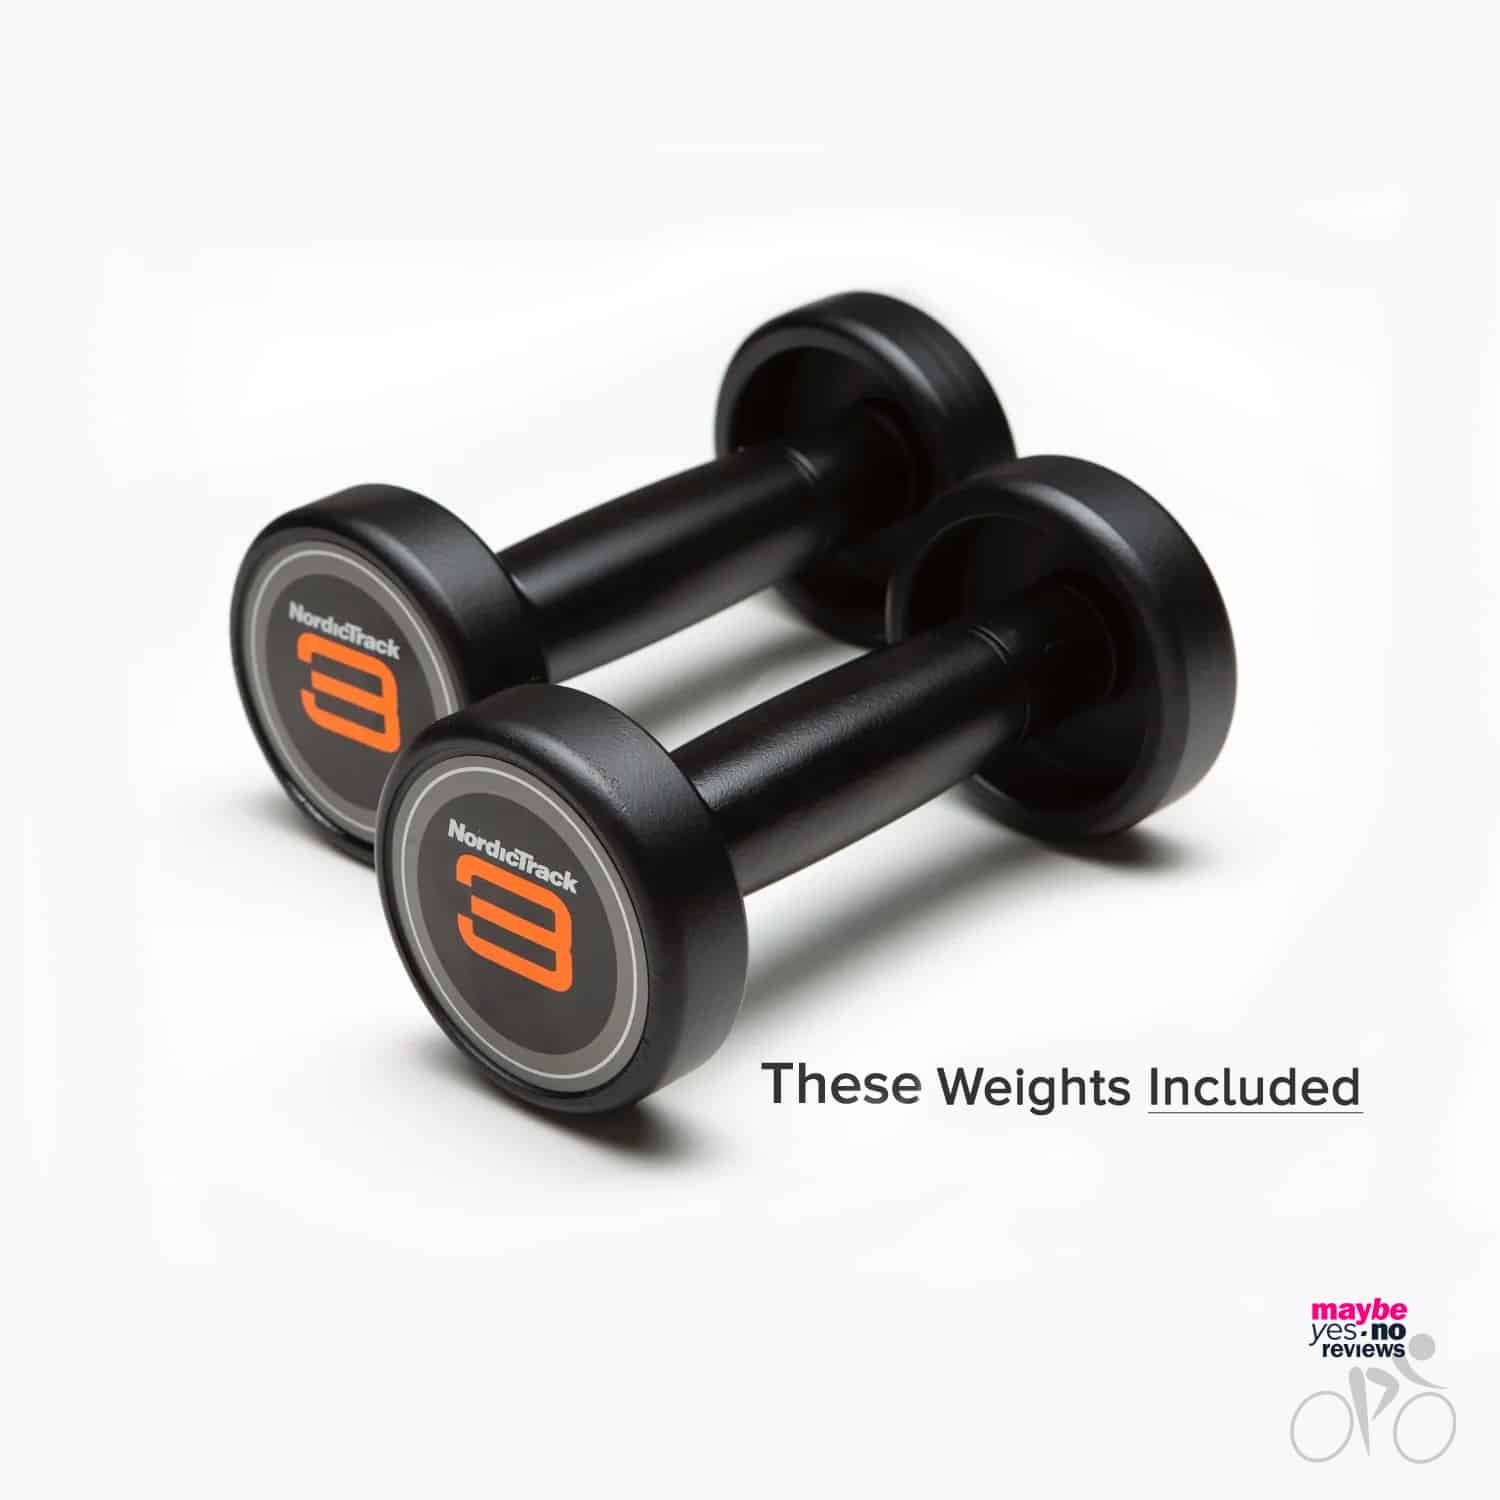 Weights included with a Studio Bike